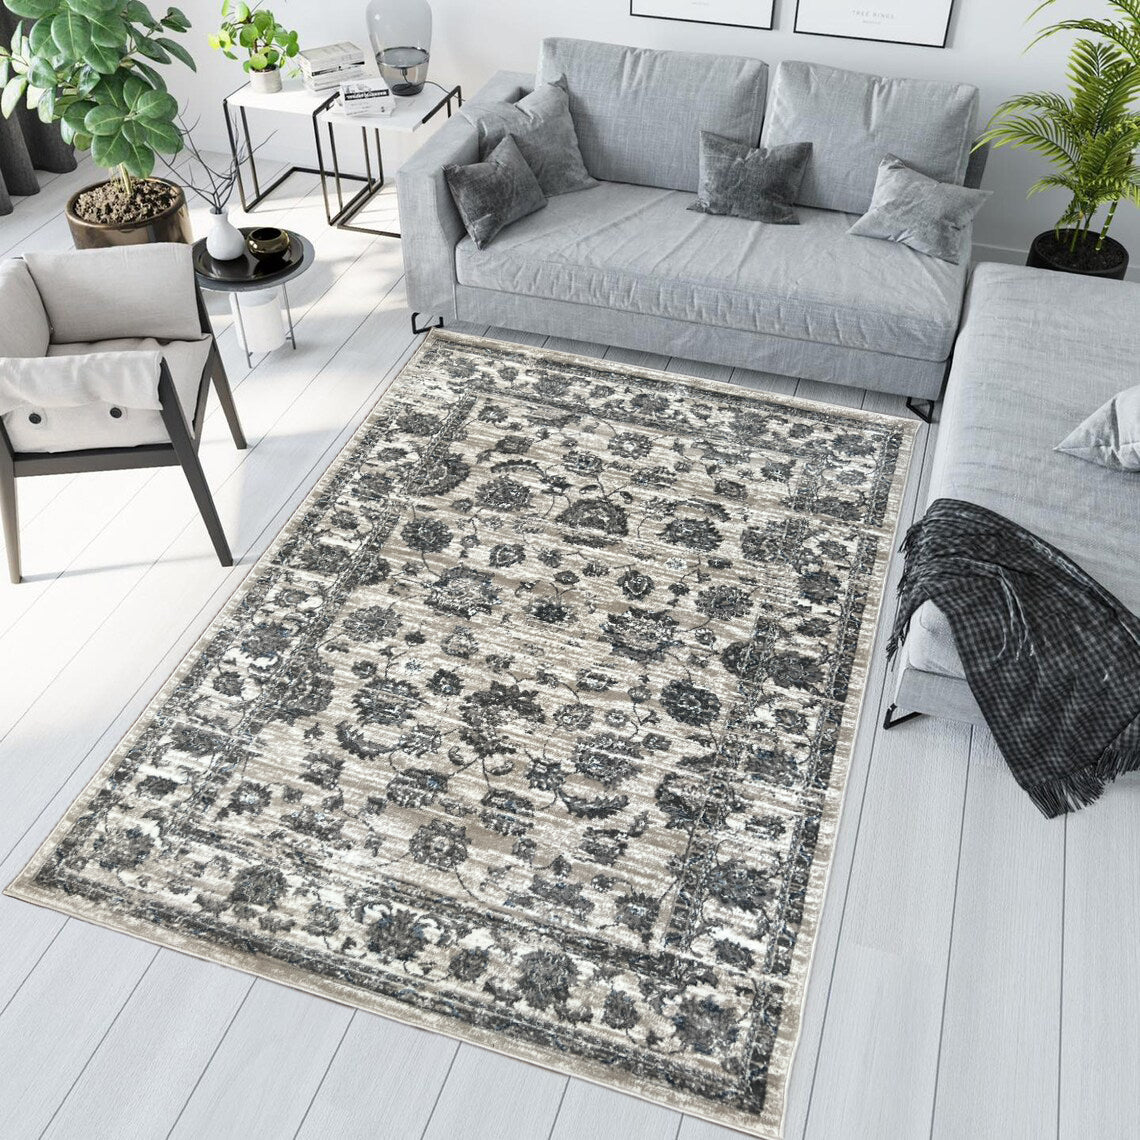 Canvello Area Rugs Premium Rugs for Living Room, Bedroom, Home Dining, Ivory, Grey, Beige